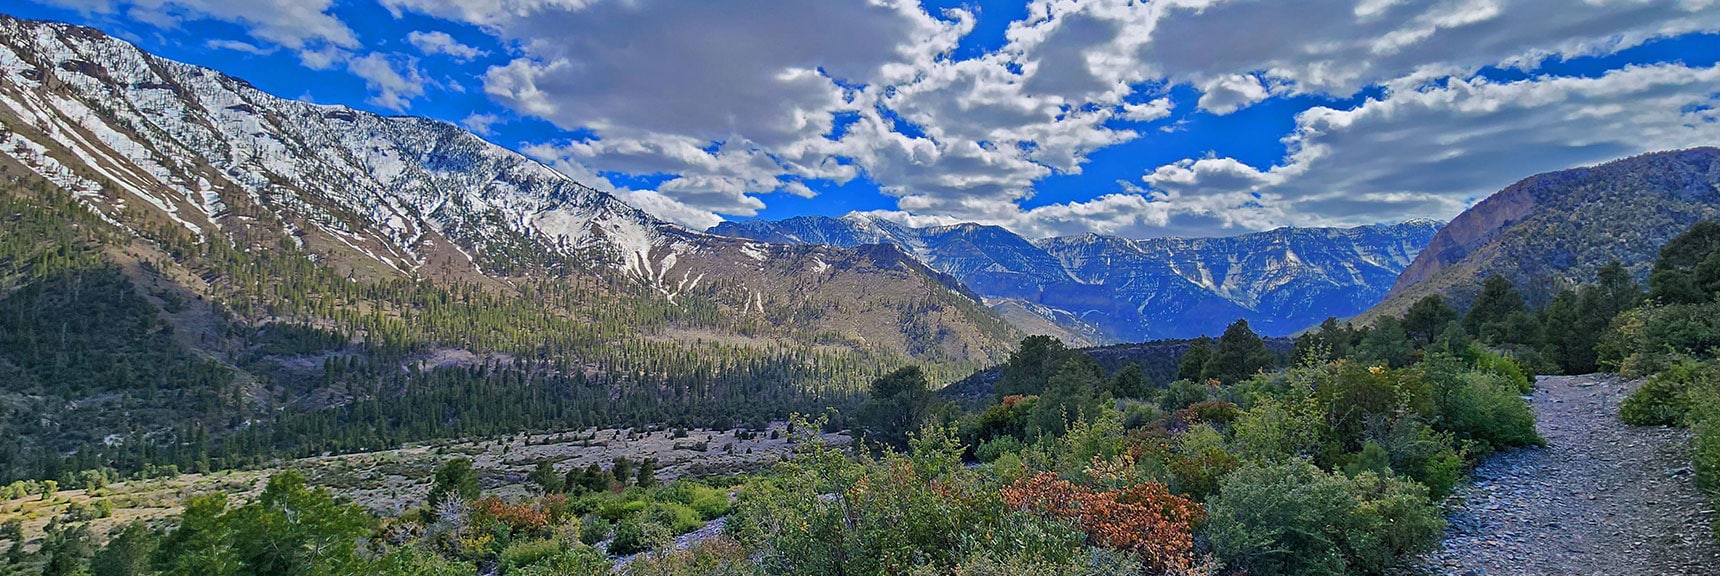 View Up To South Rim of Kyle Canyon | Eagles Nest Loop | Mt Charleston Wilderness | Spring Mountains, Nevada